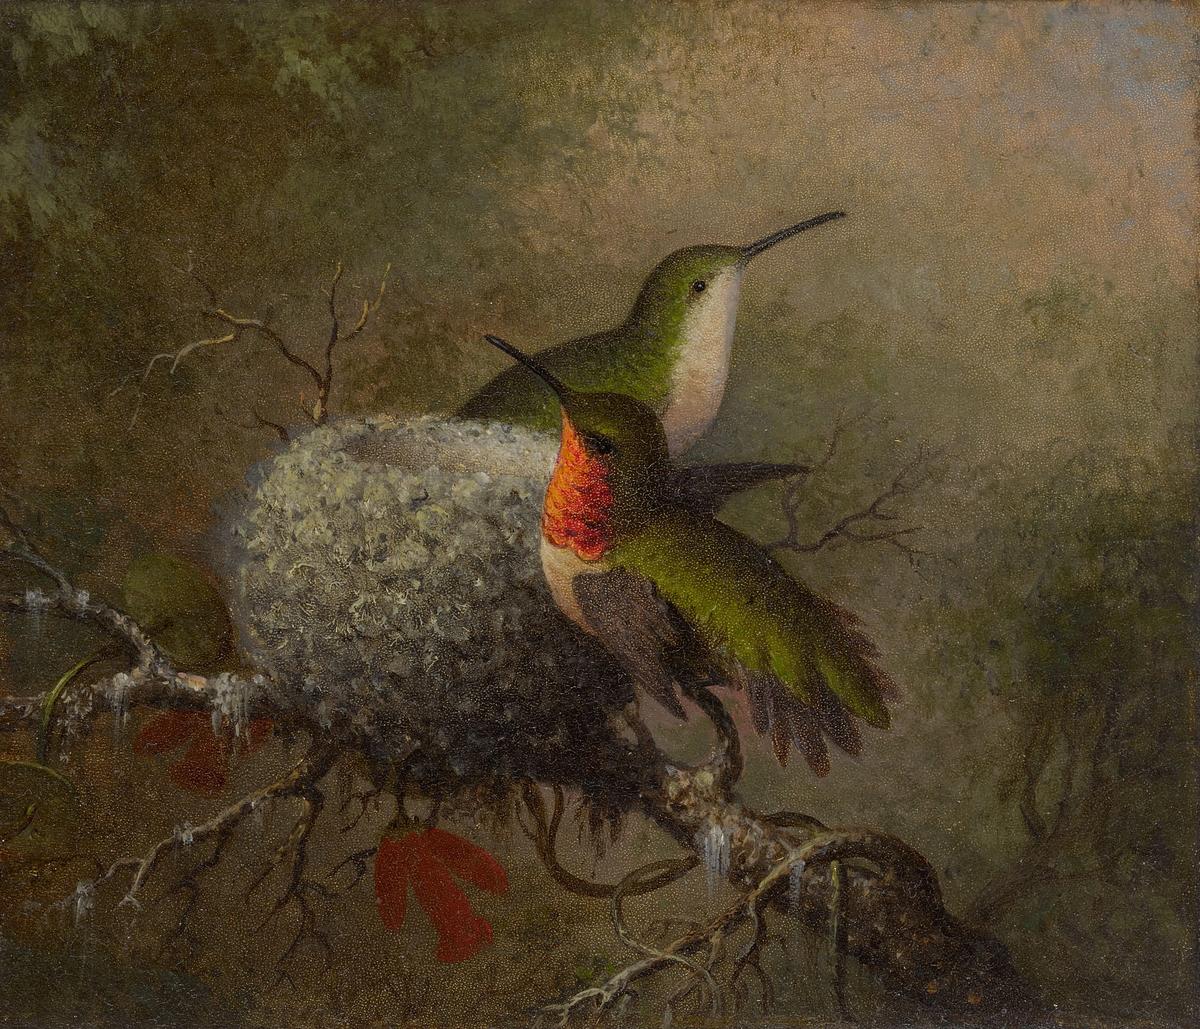 Martin Johnson Heade's tiny painting, Two Ruby Throats by Their Nest, sold for $212,500 at Sotheby's. Courtesy of Sotheby's